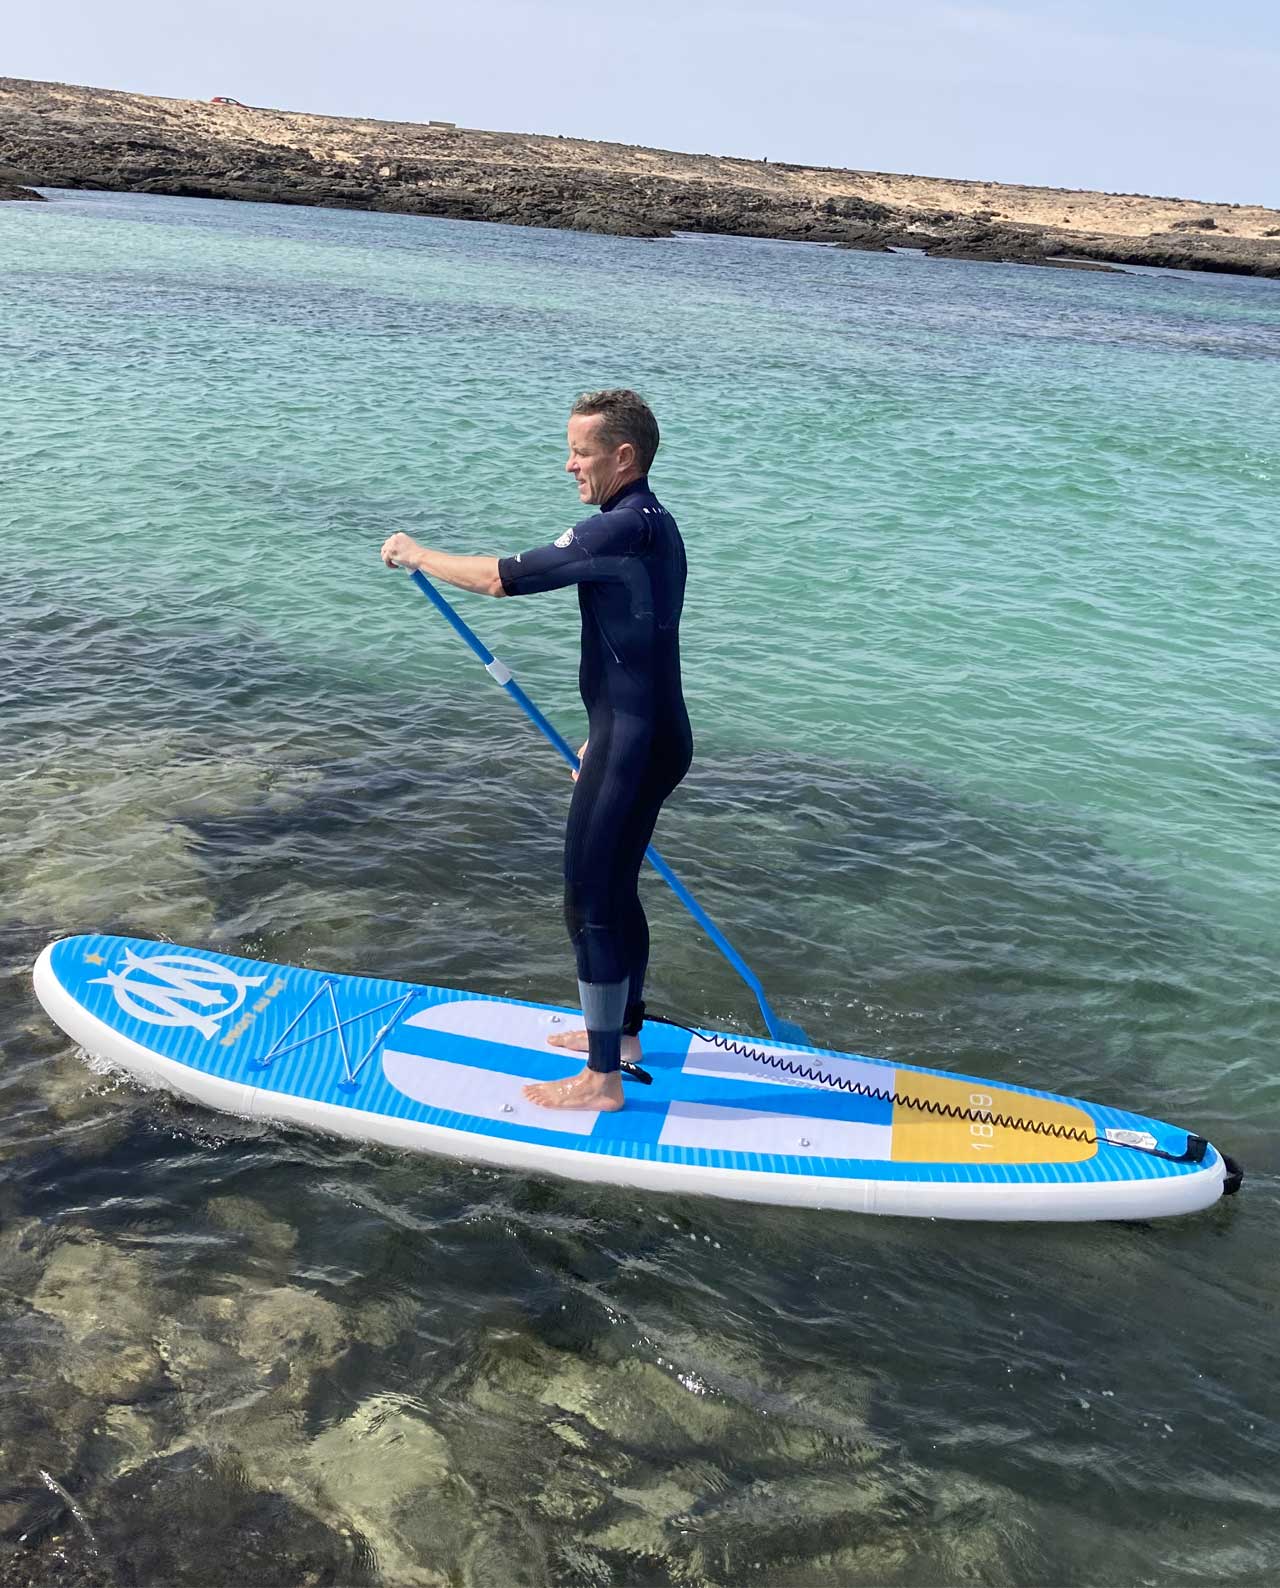 HANA Outdoors  Paddle gonflable 10'0 Olympique de Marseille – OM